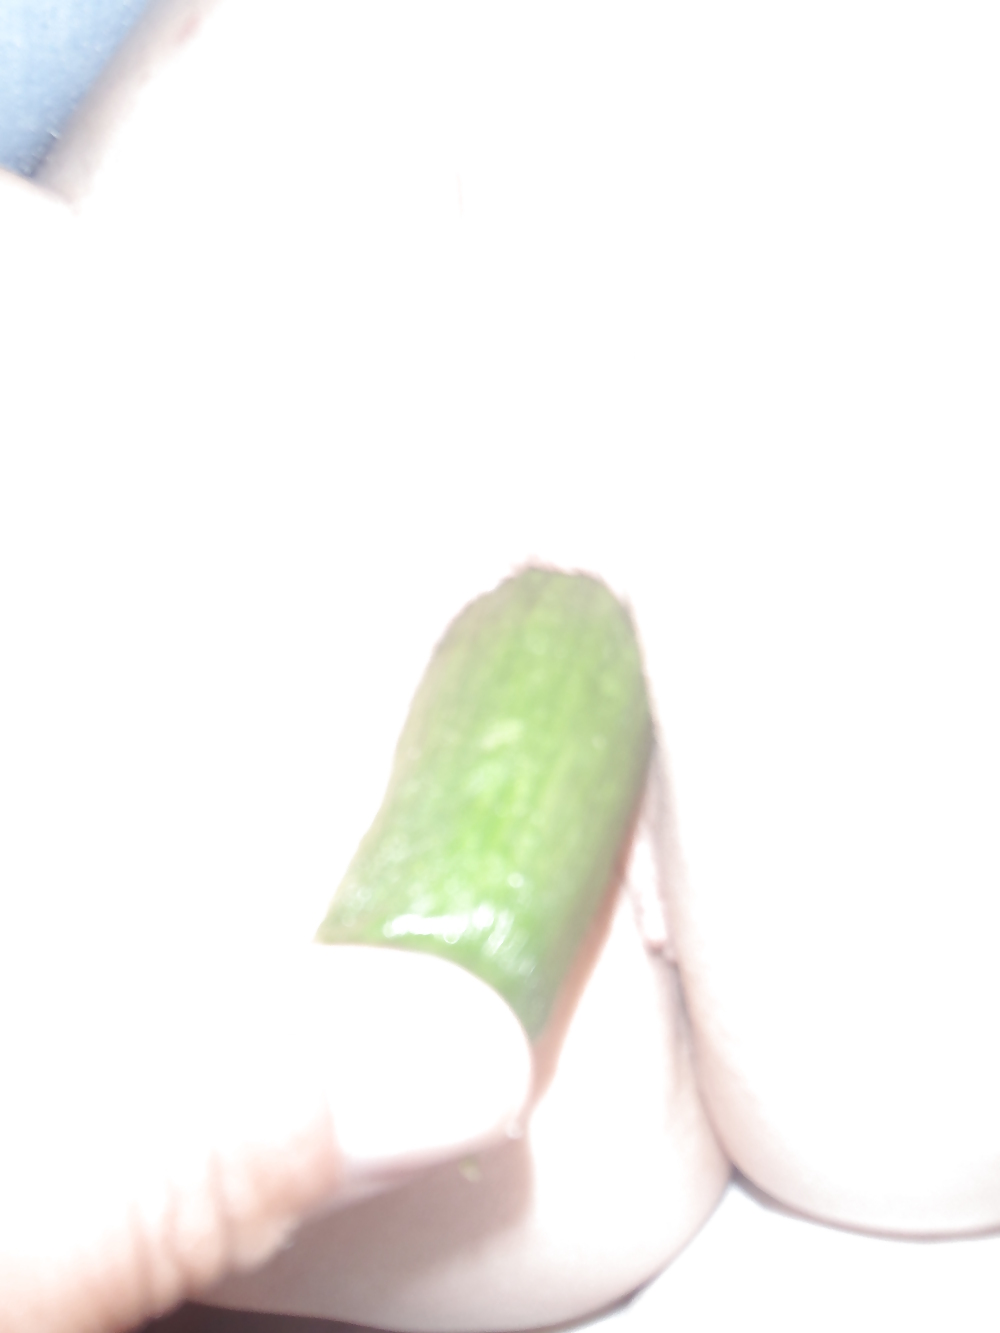 Cucumber time for Slave porn pictures